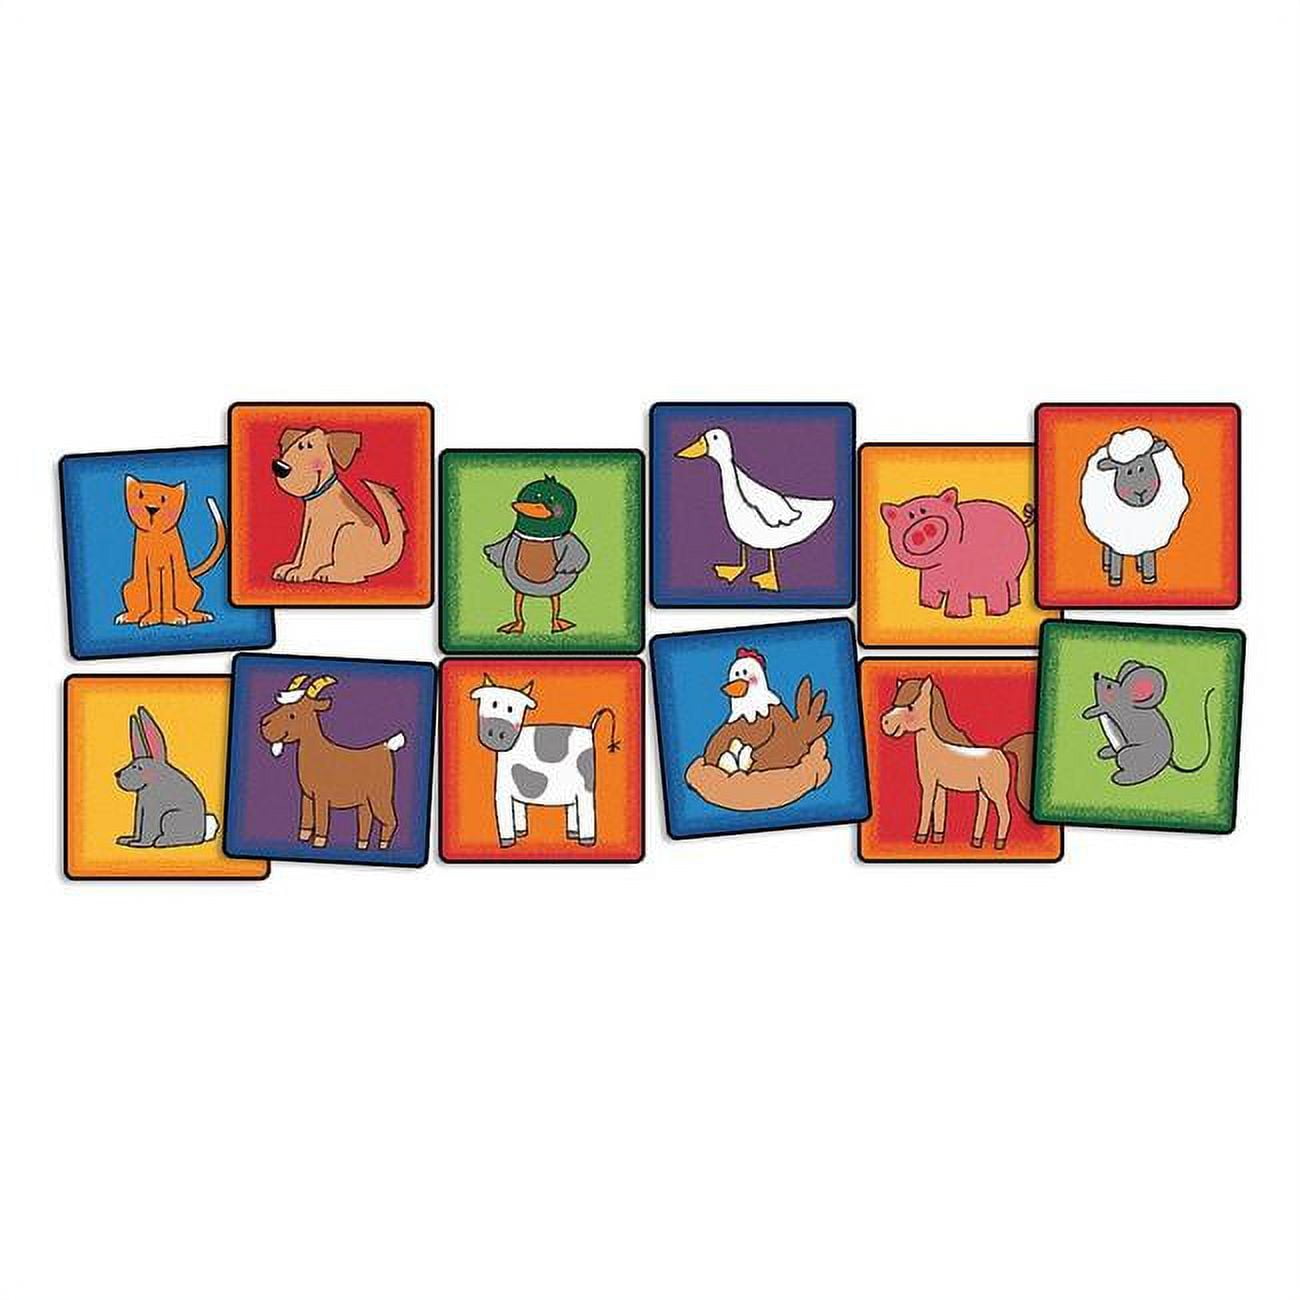 Picture of Carpets for Kids 3890 Farm Animal Seating Kit, Set of 12